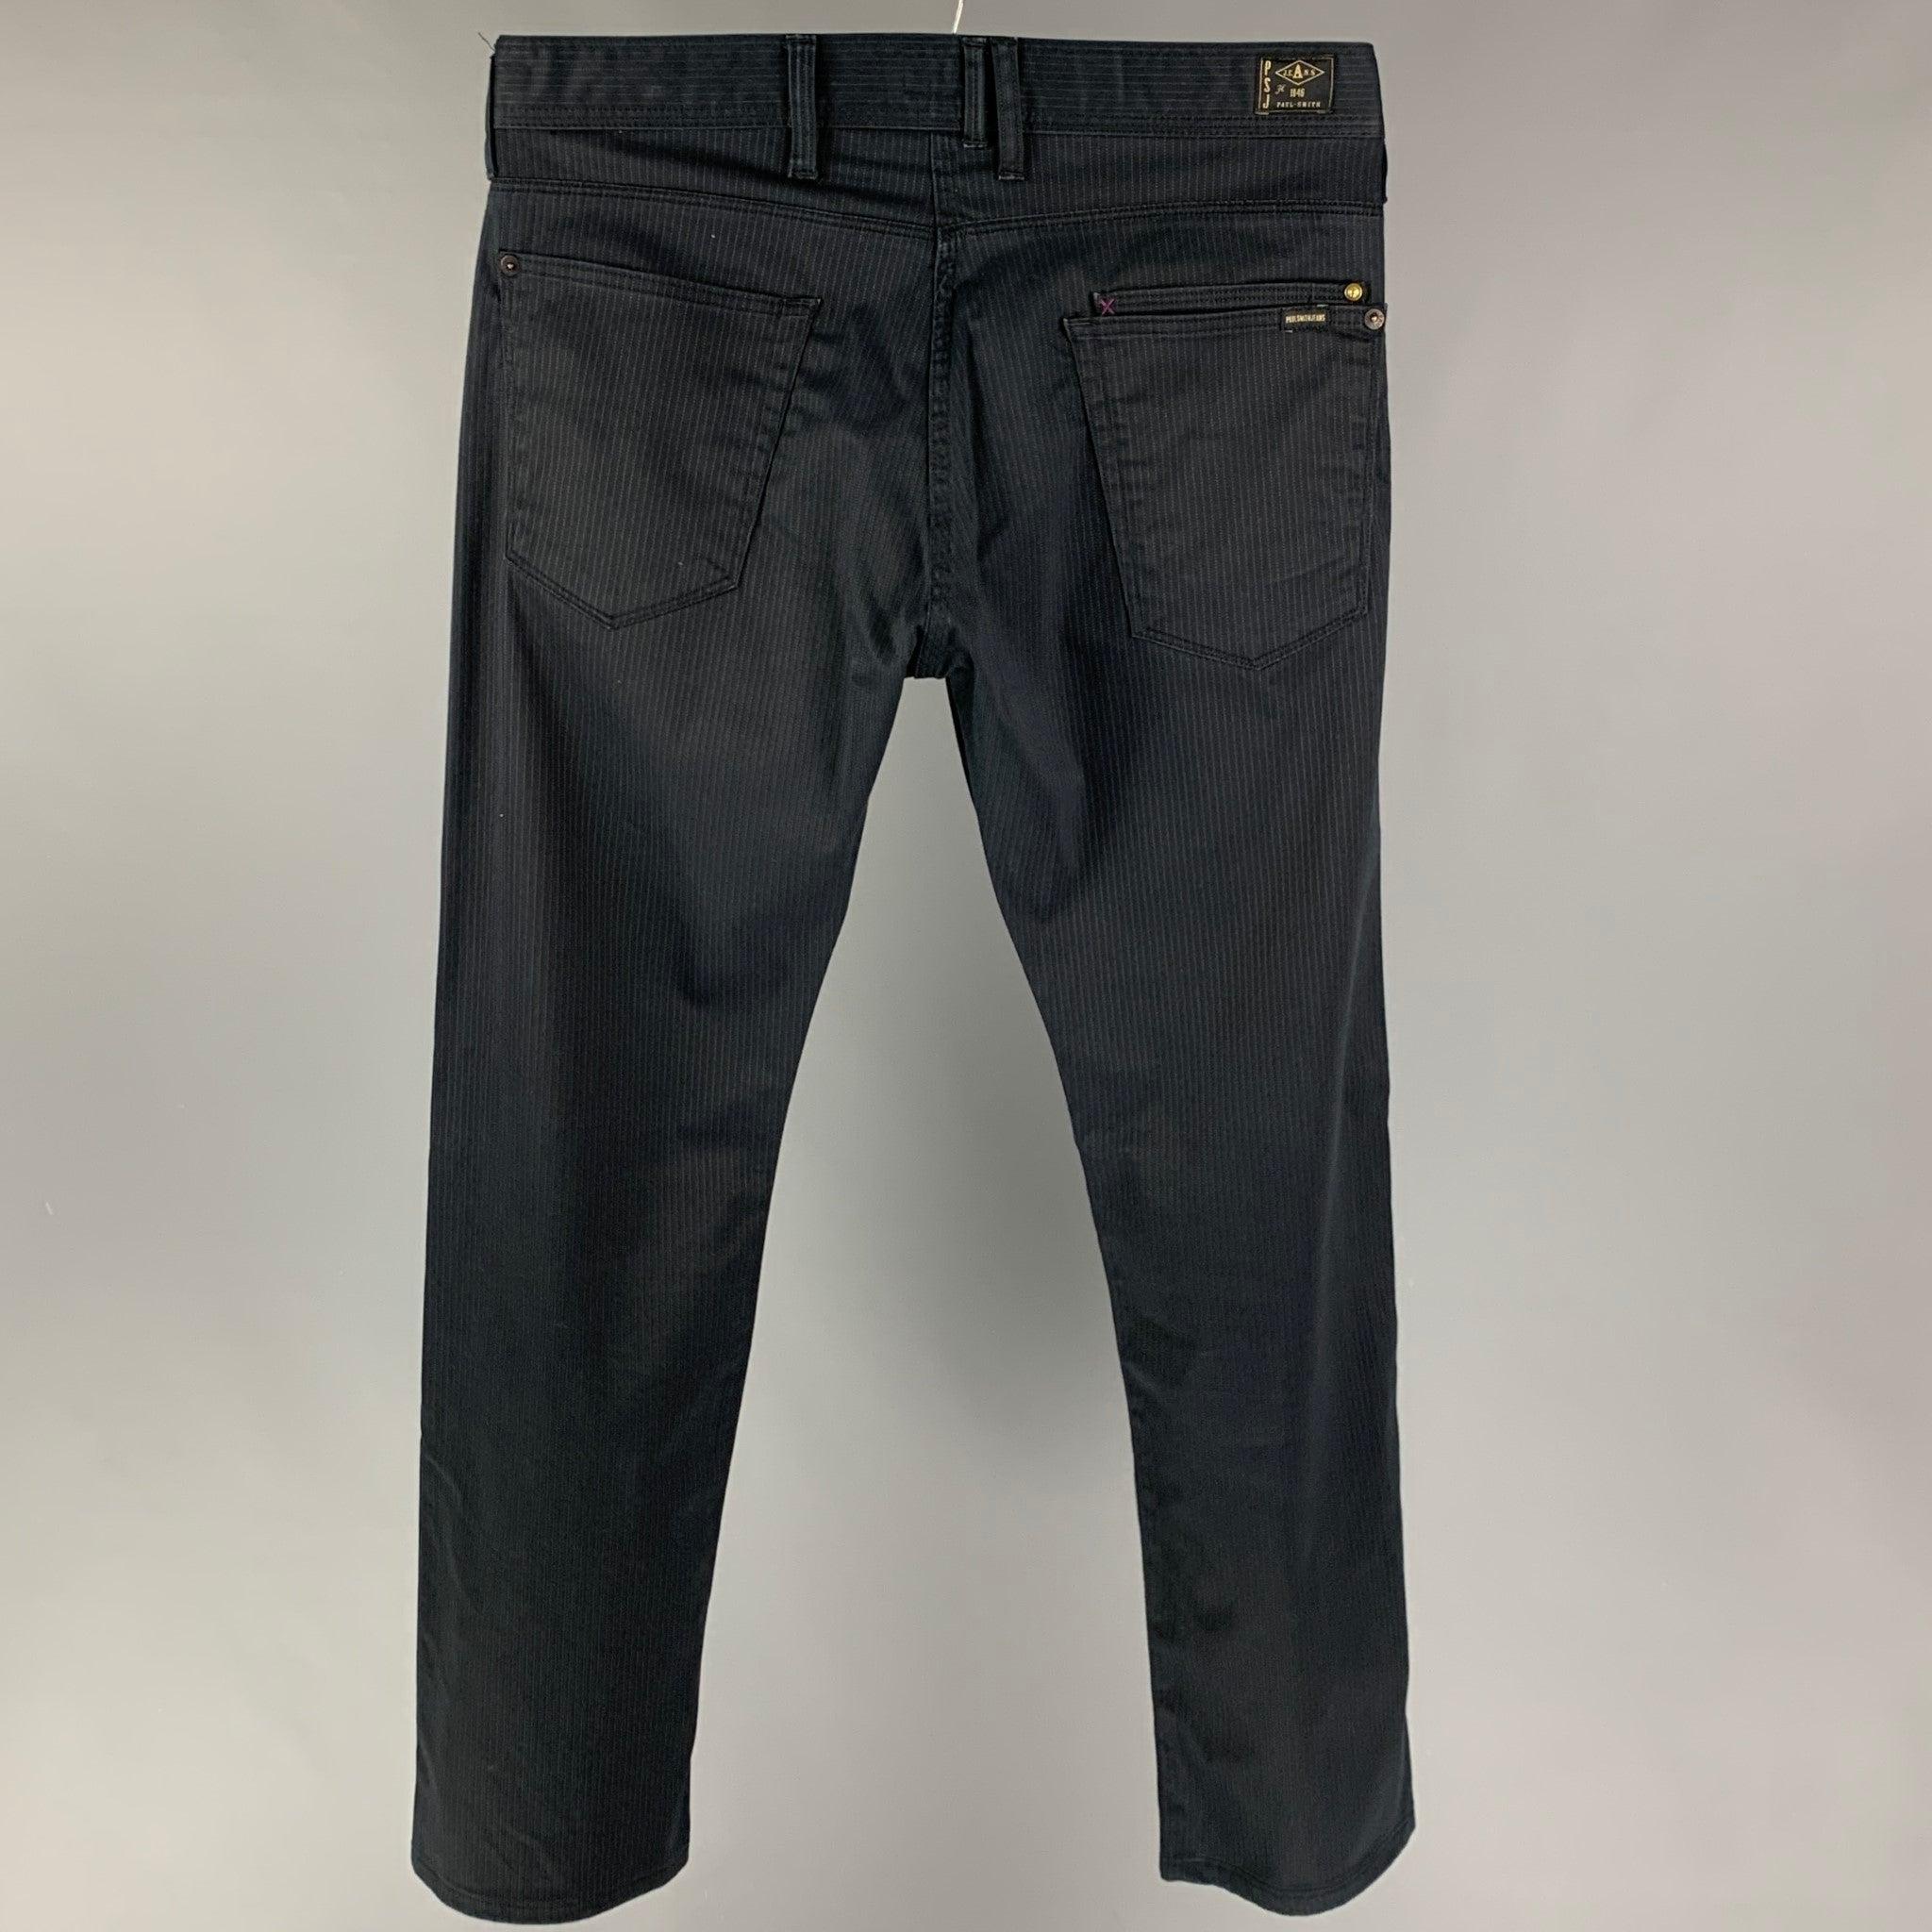 PAUL SMITH pants comes in a navy pinstripe cotton blend featuring a jean cut style and a button fly closure.
Very Good
Pre-Owned Condition. 

Marked:   30 

Measurements: 
  Waist: 30 inches  Rise: 11 inches  Inseam: 30 inches 
  
  
 
Reference: